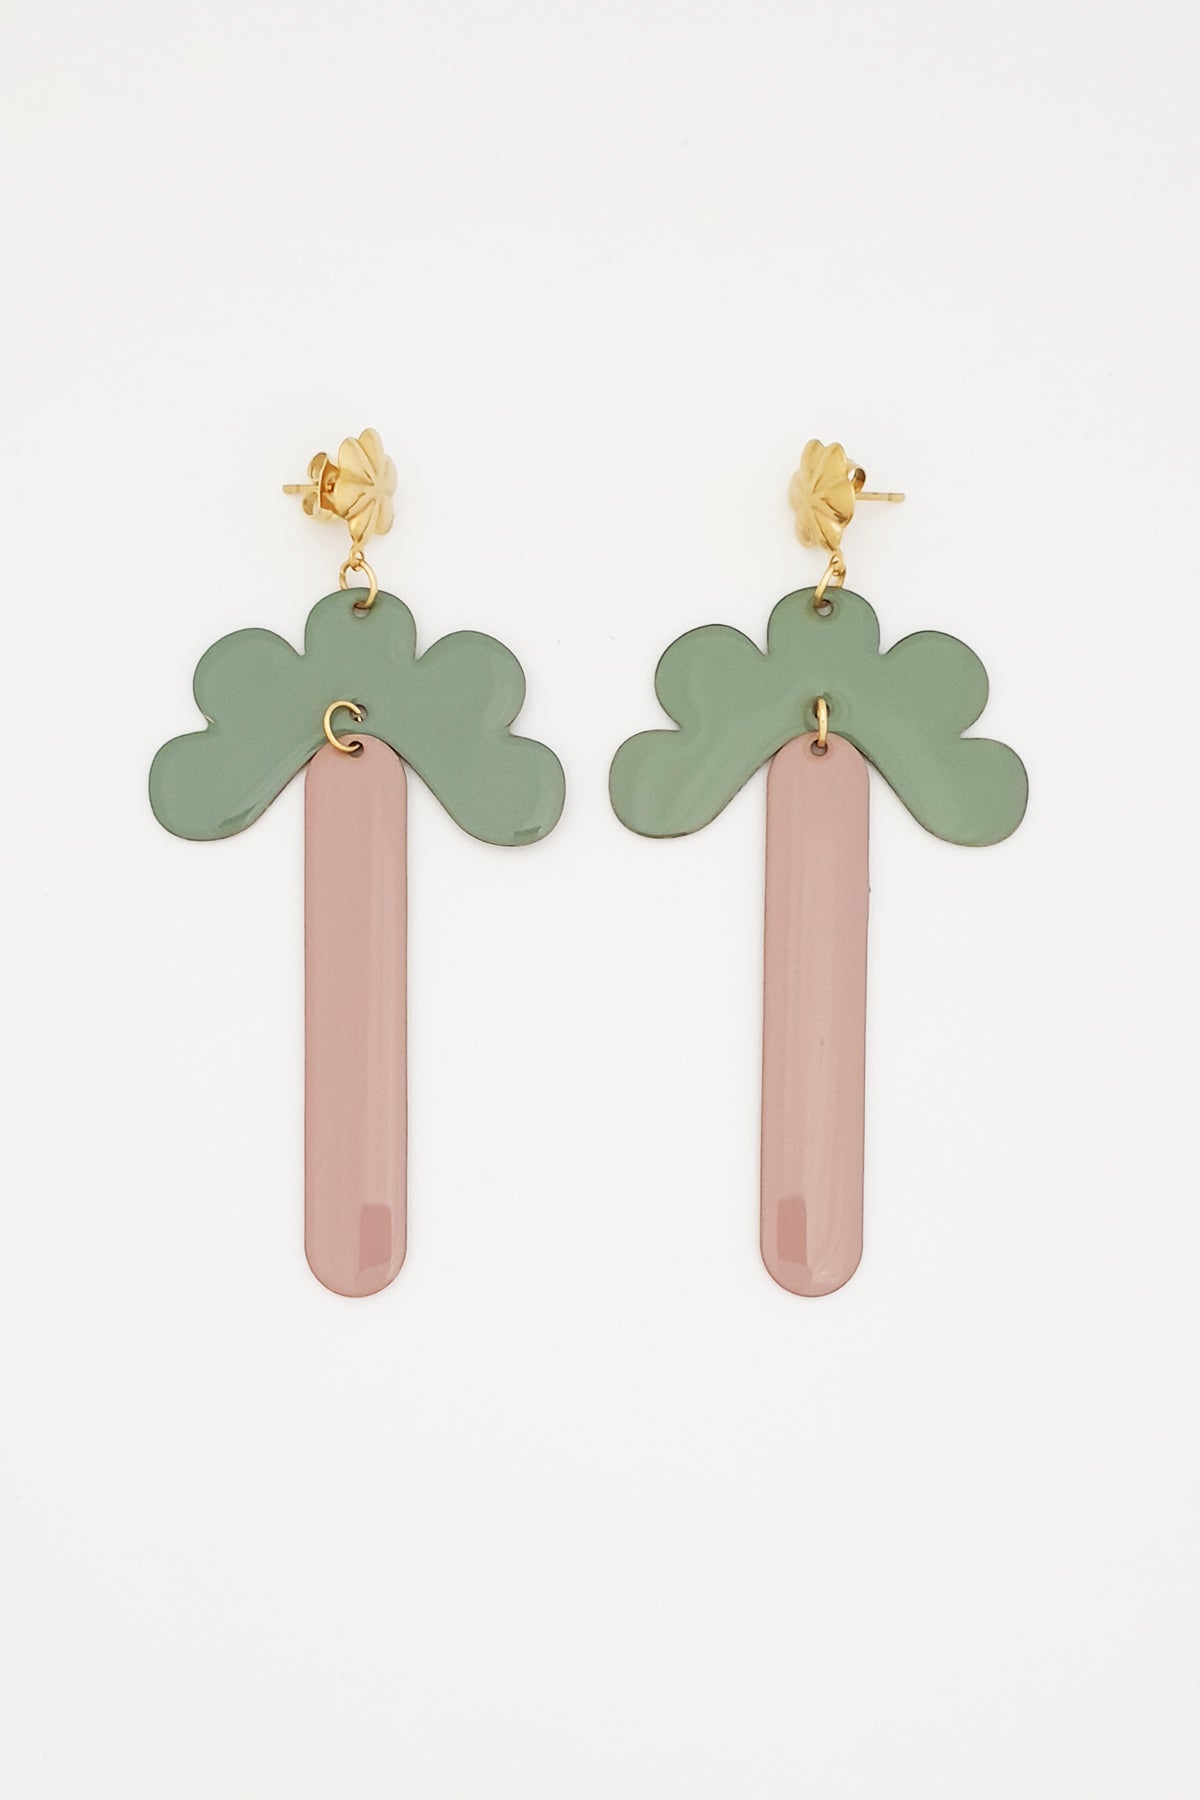 A pair of stud dangle earrings lay against a white background. They feature a gold flower shaped stud top, a duckegg enamel connector piece with resemblance to a half flower, and a mauve enamel drop.